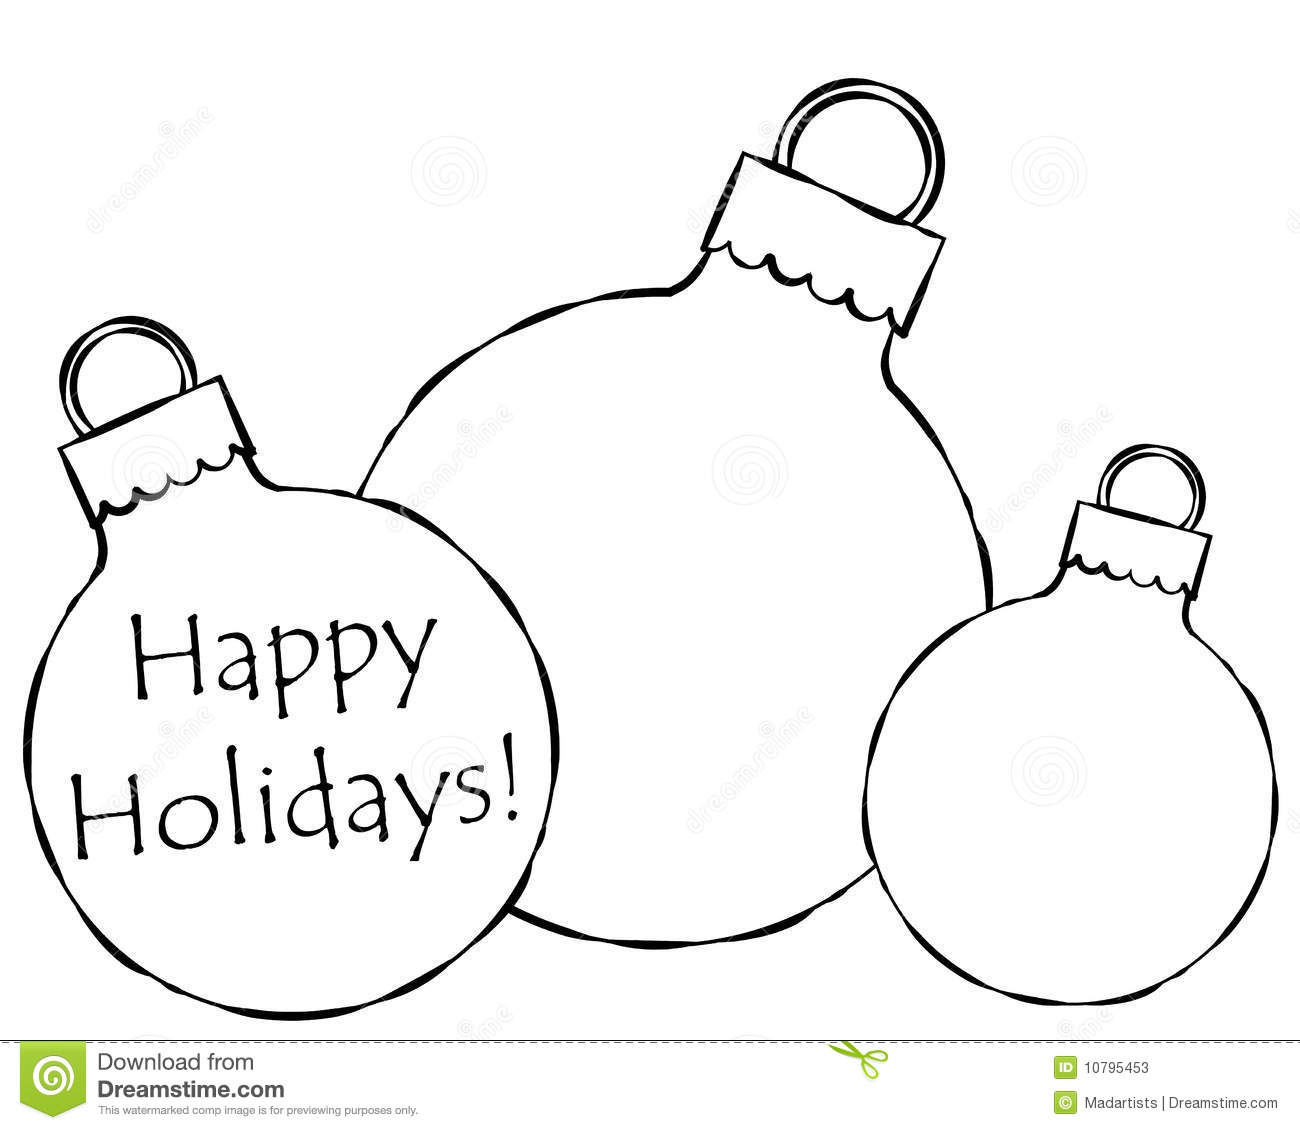 Black And White Illustration Featuring Christmas Ornaments   Some